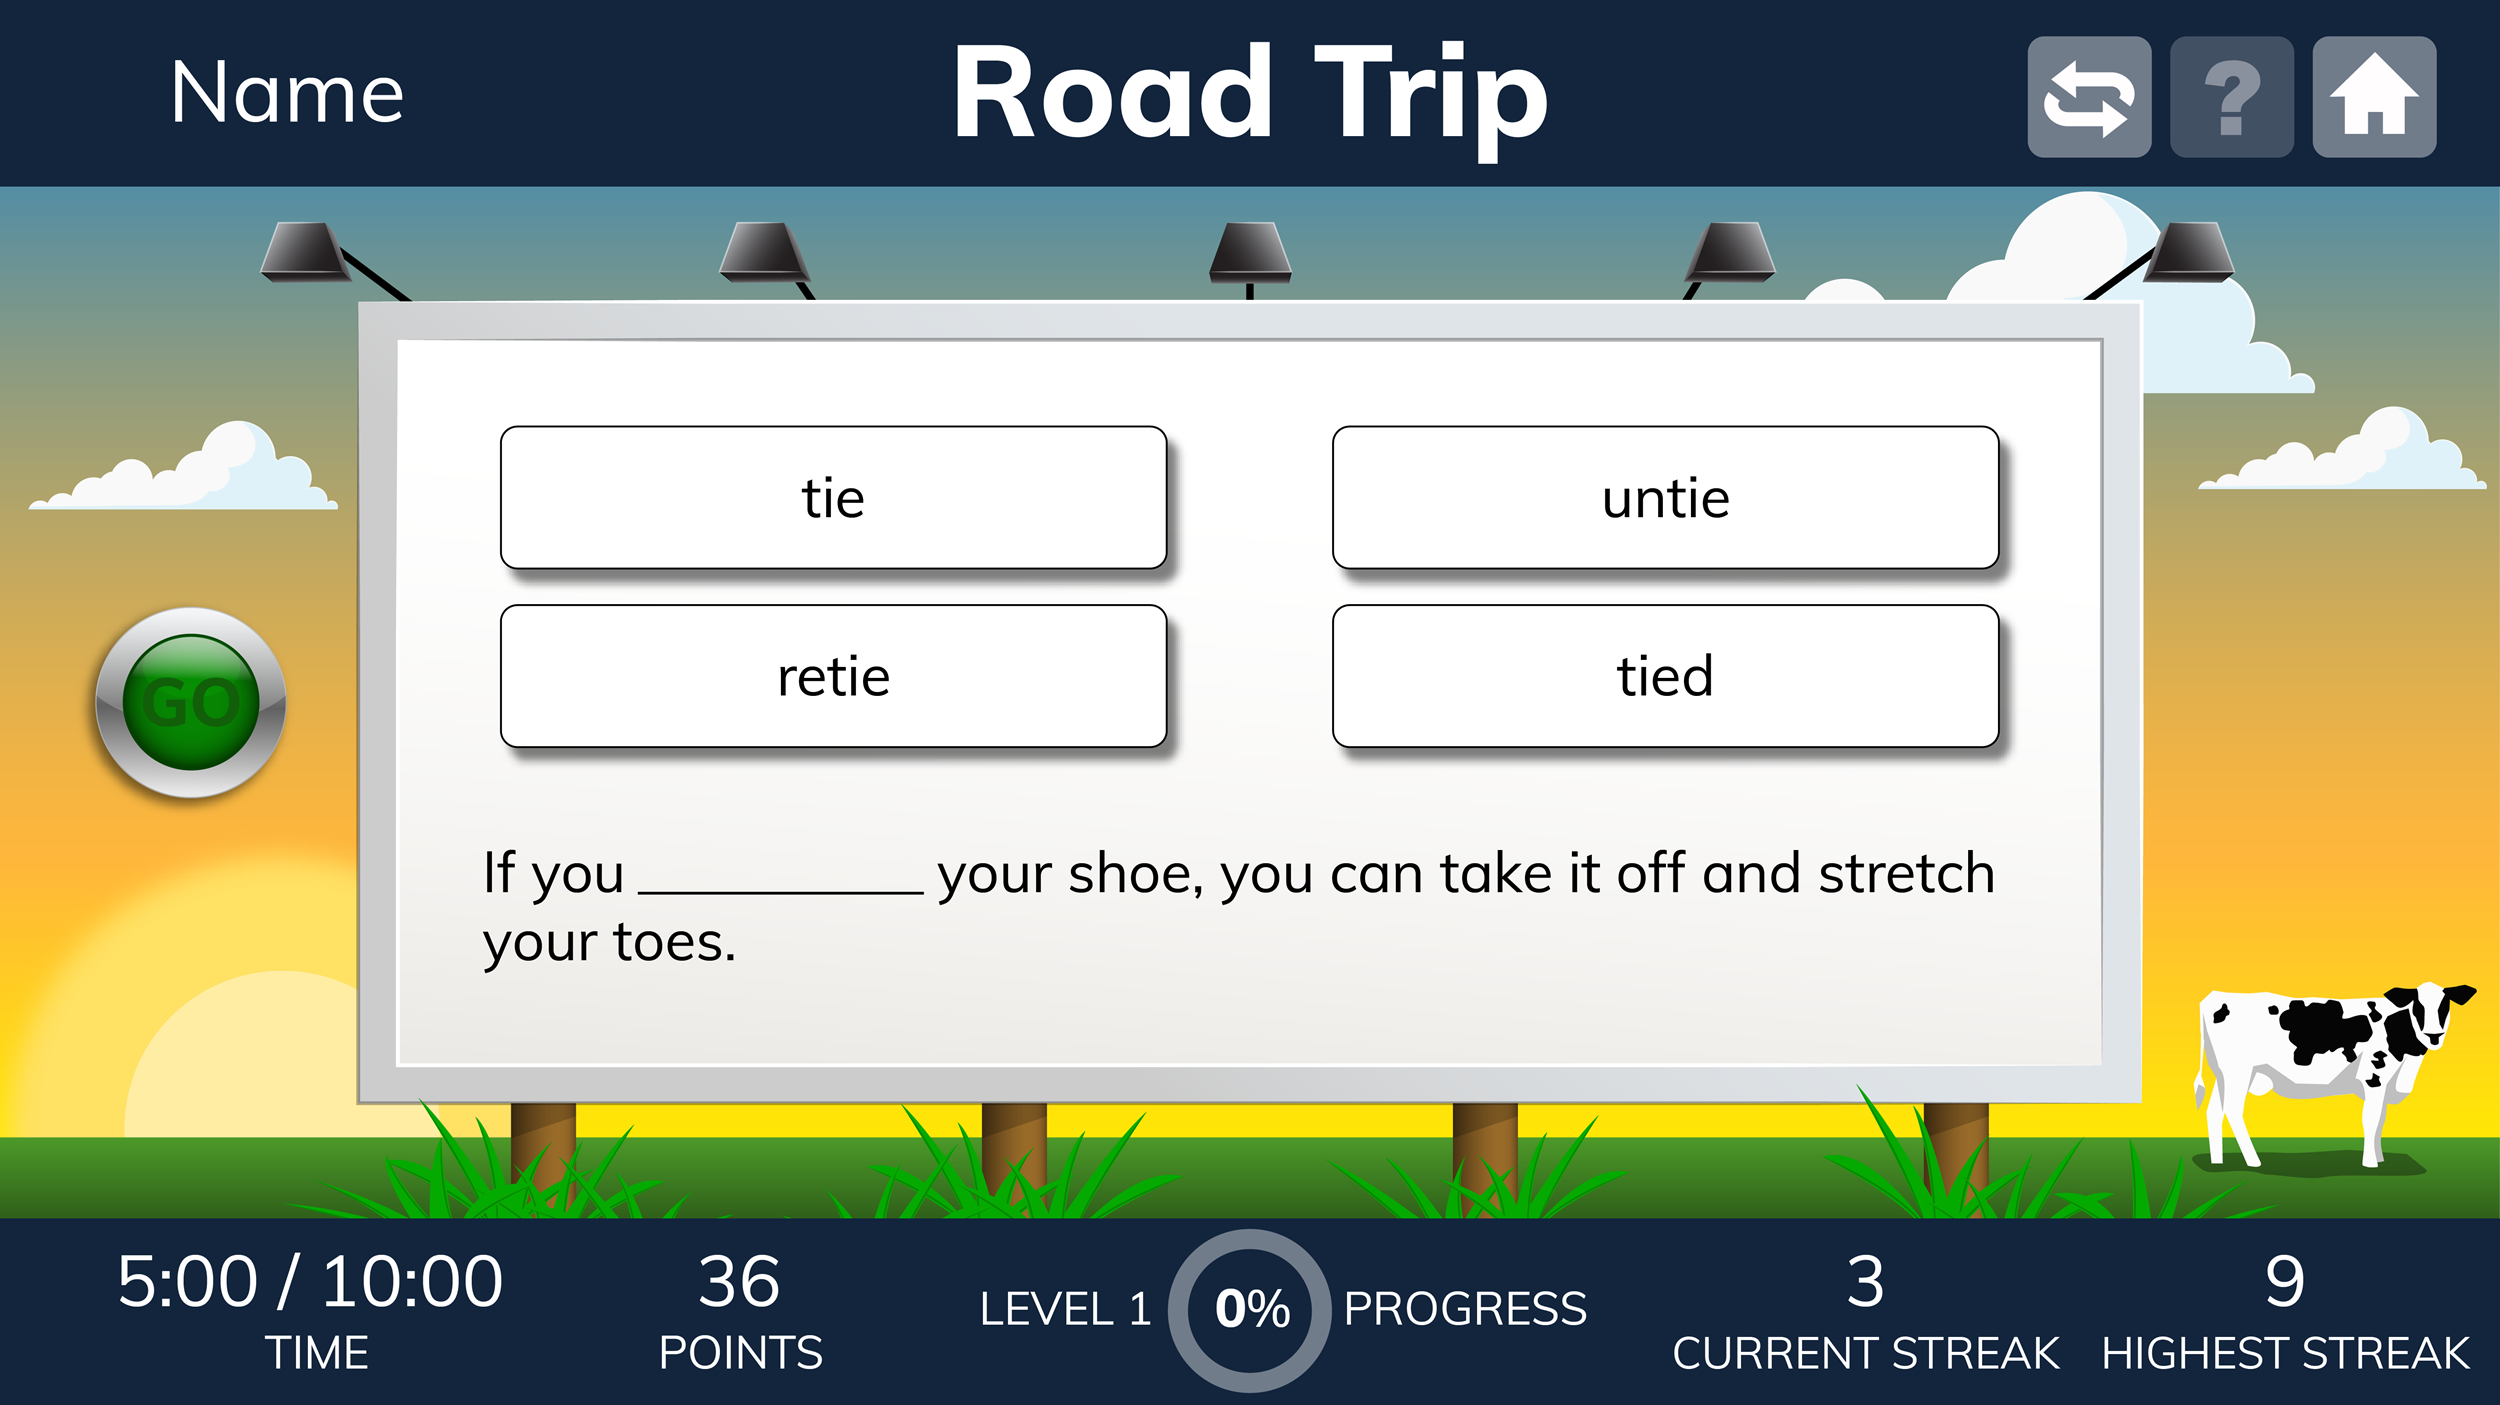 Road Trip exercise screen